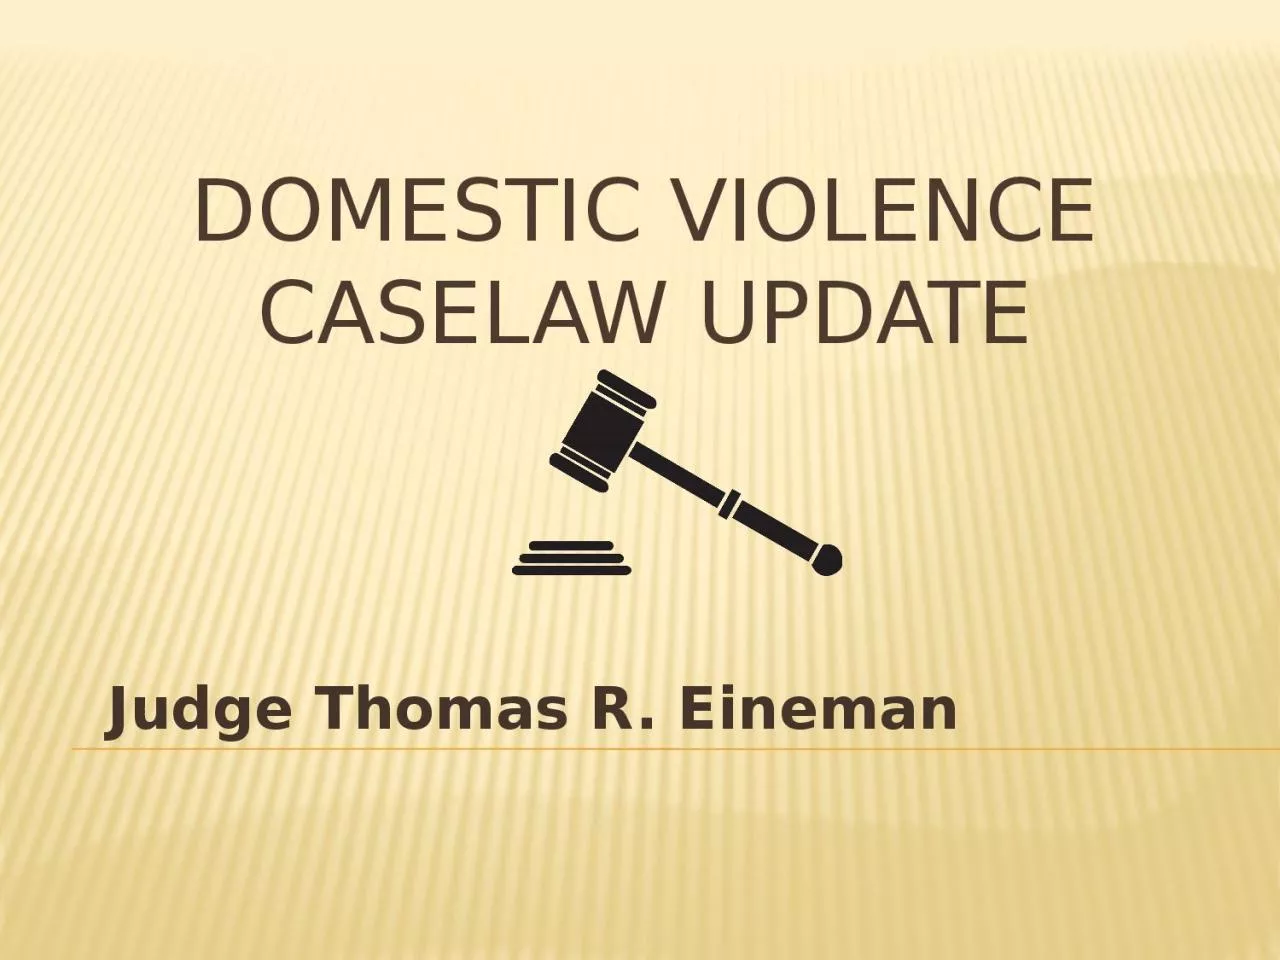 Domestic violence caselaw update